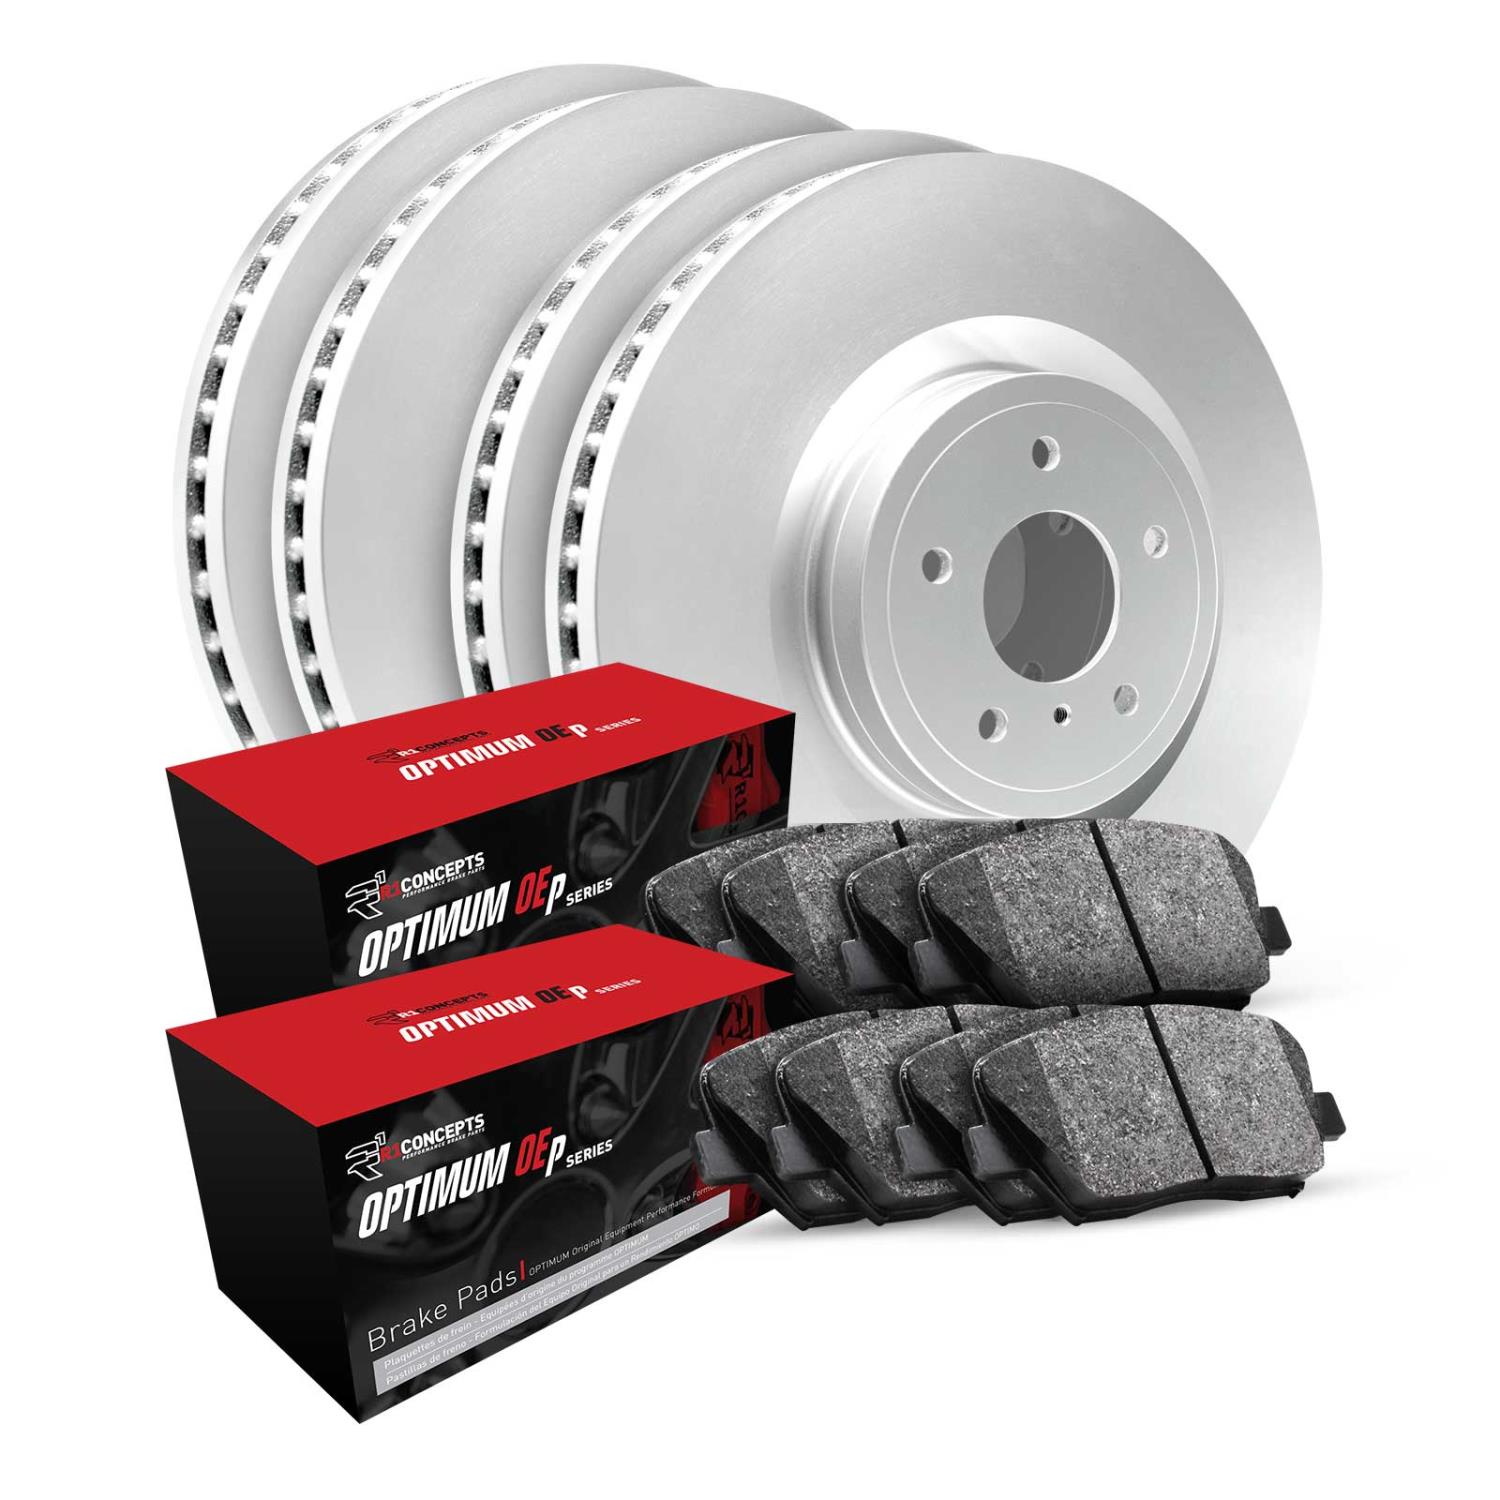 GEO-Carbon Brake Rotor & Drum Set w/Optimum OE Pads & Shoes, 1998-2002 Fits Multiple Makes/Models, Position: Front & Rear